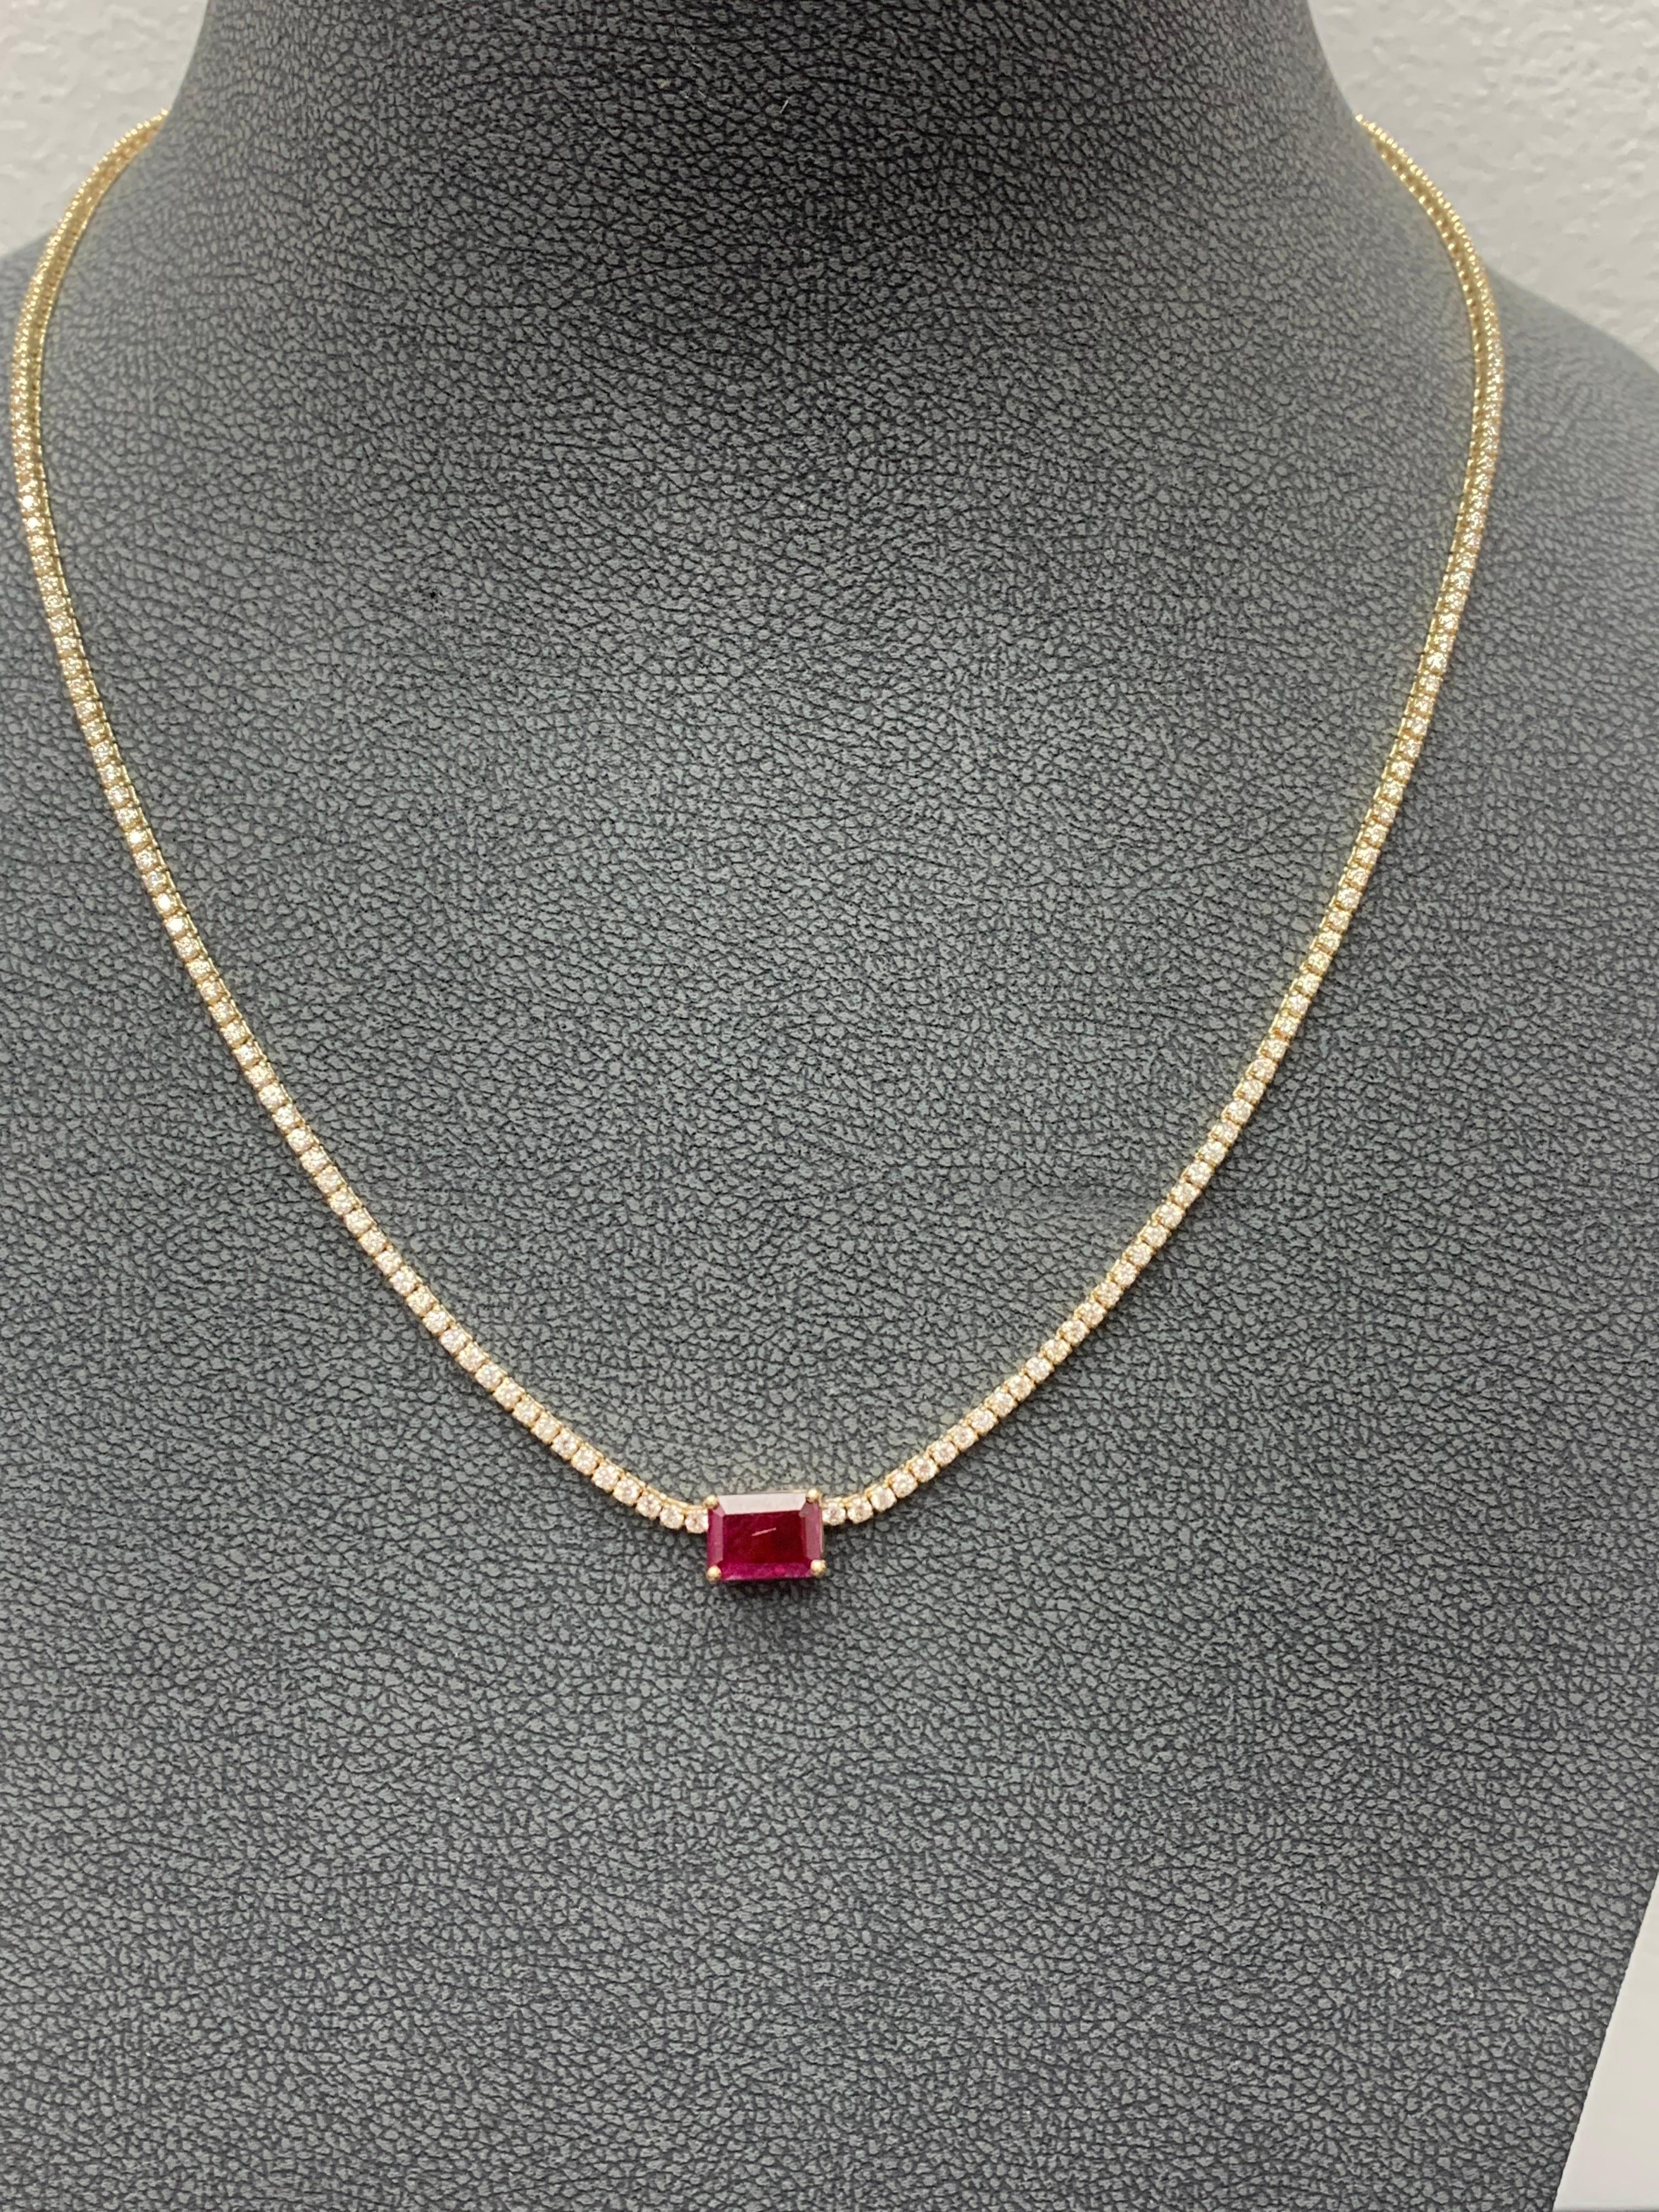 1.49 Carat Emerald Cut Ruby and Diamond Tennis Necklace in 14K Yellow Gold For Sale 2